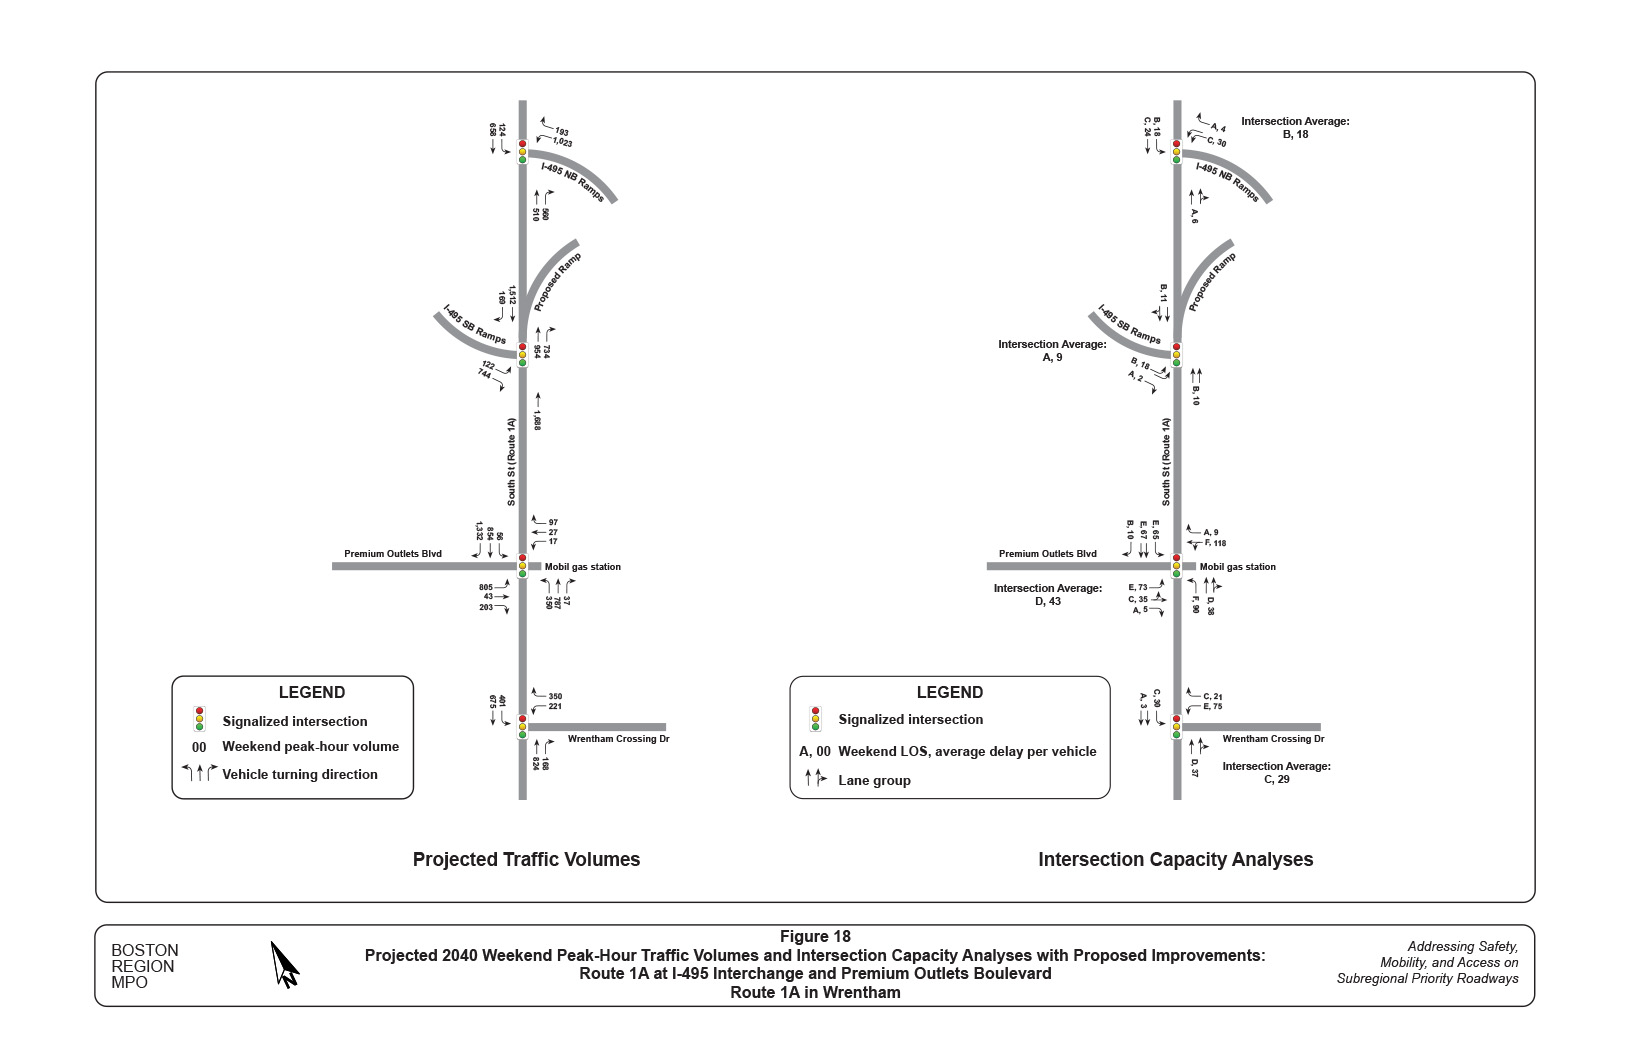 Figure 18 contains two diagrams that provide weekend peak-hour traffic volumes, level of service, and average delay per vehicle, projected to the year 2040 and assuming the implementation of the proposed improvements, for the section of Route 1A between the Interstate 495 interchange and Premium Outlets Boulevard.